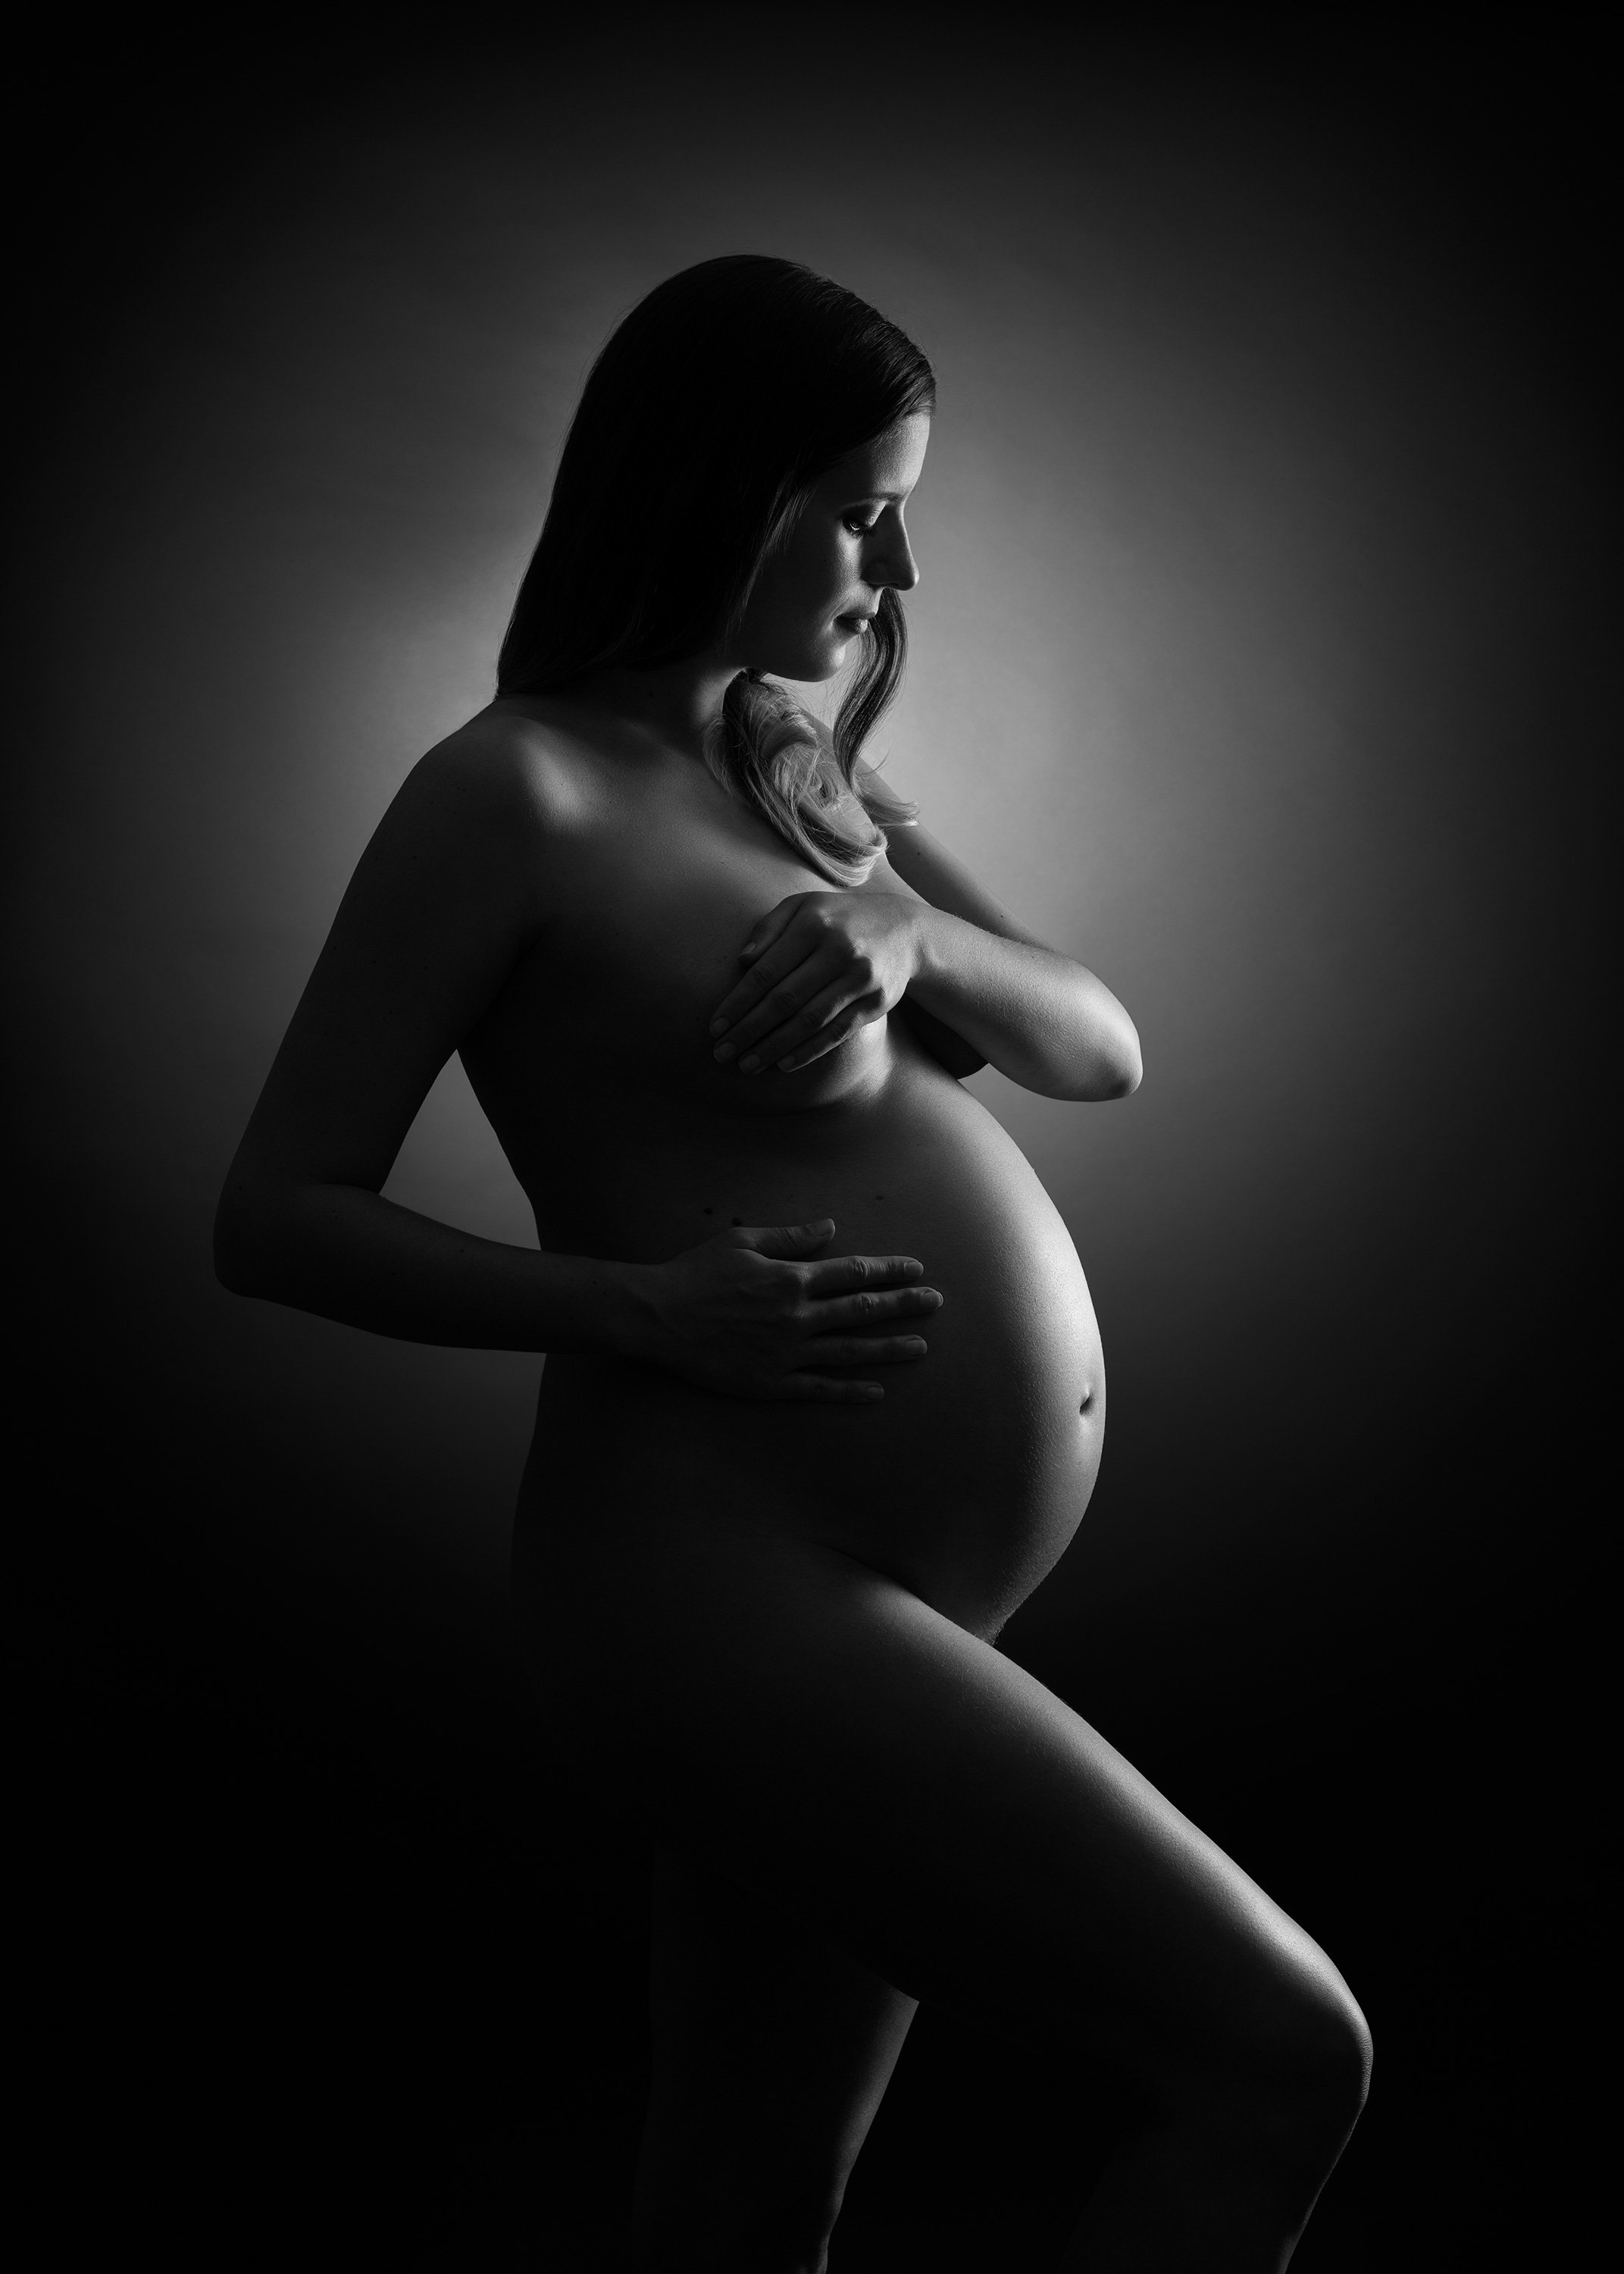 Sexy Pregnant Nude Art - Pregnancy nudes, the most requested maternity studio portrait. â€” Nemi  Miller Photography â€“ Pregnancy and Newborn Photographer London - Maternity  Dress Photoshoots